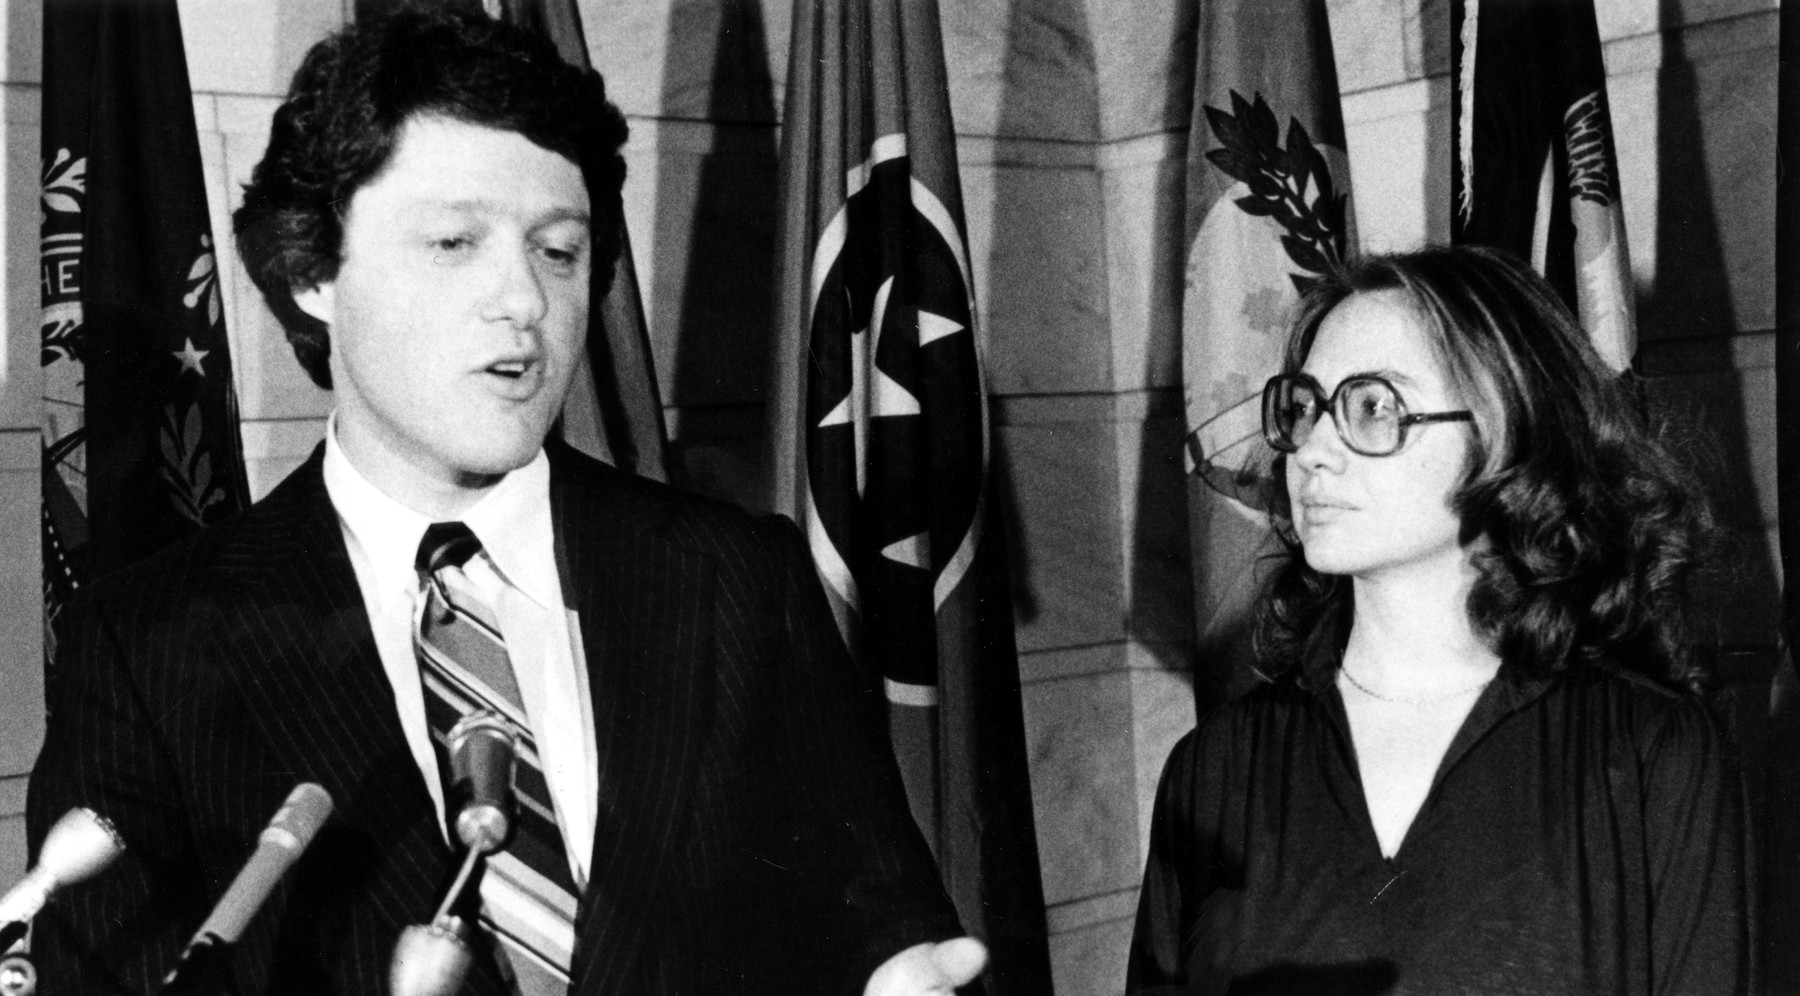 Bill Clinton and wife Hillary Clinton, on podium, 1970s, Image: 98242409, License: Rights-managed, Restrictions: For usage credit please use; Courtesy Everett Collection, Model Release: no, Credit line: Courtesy Everett Collection / Everett / Profimedia